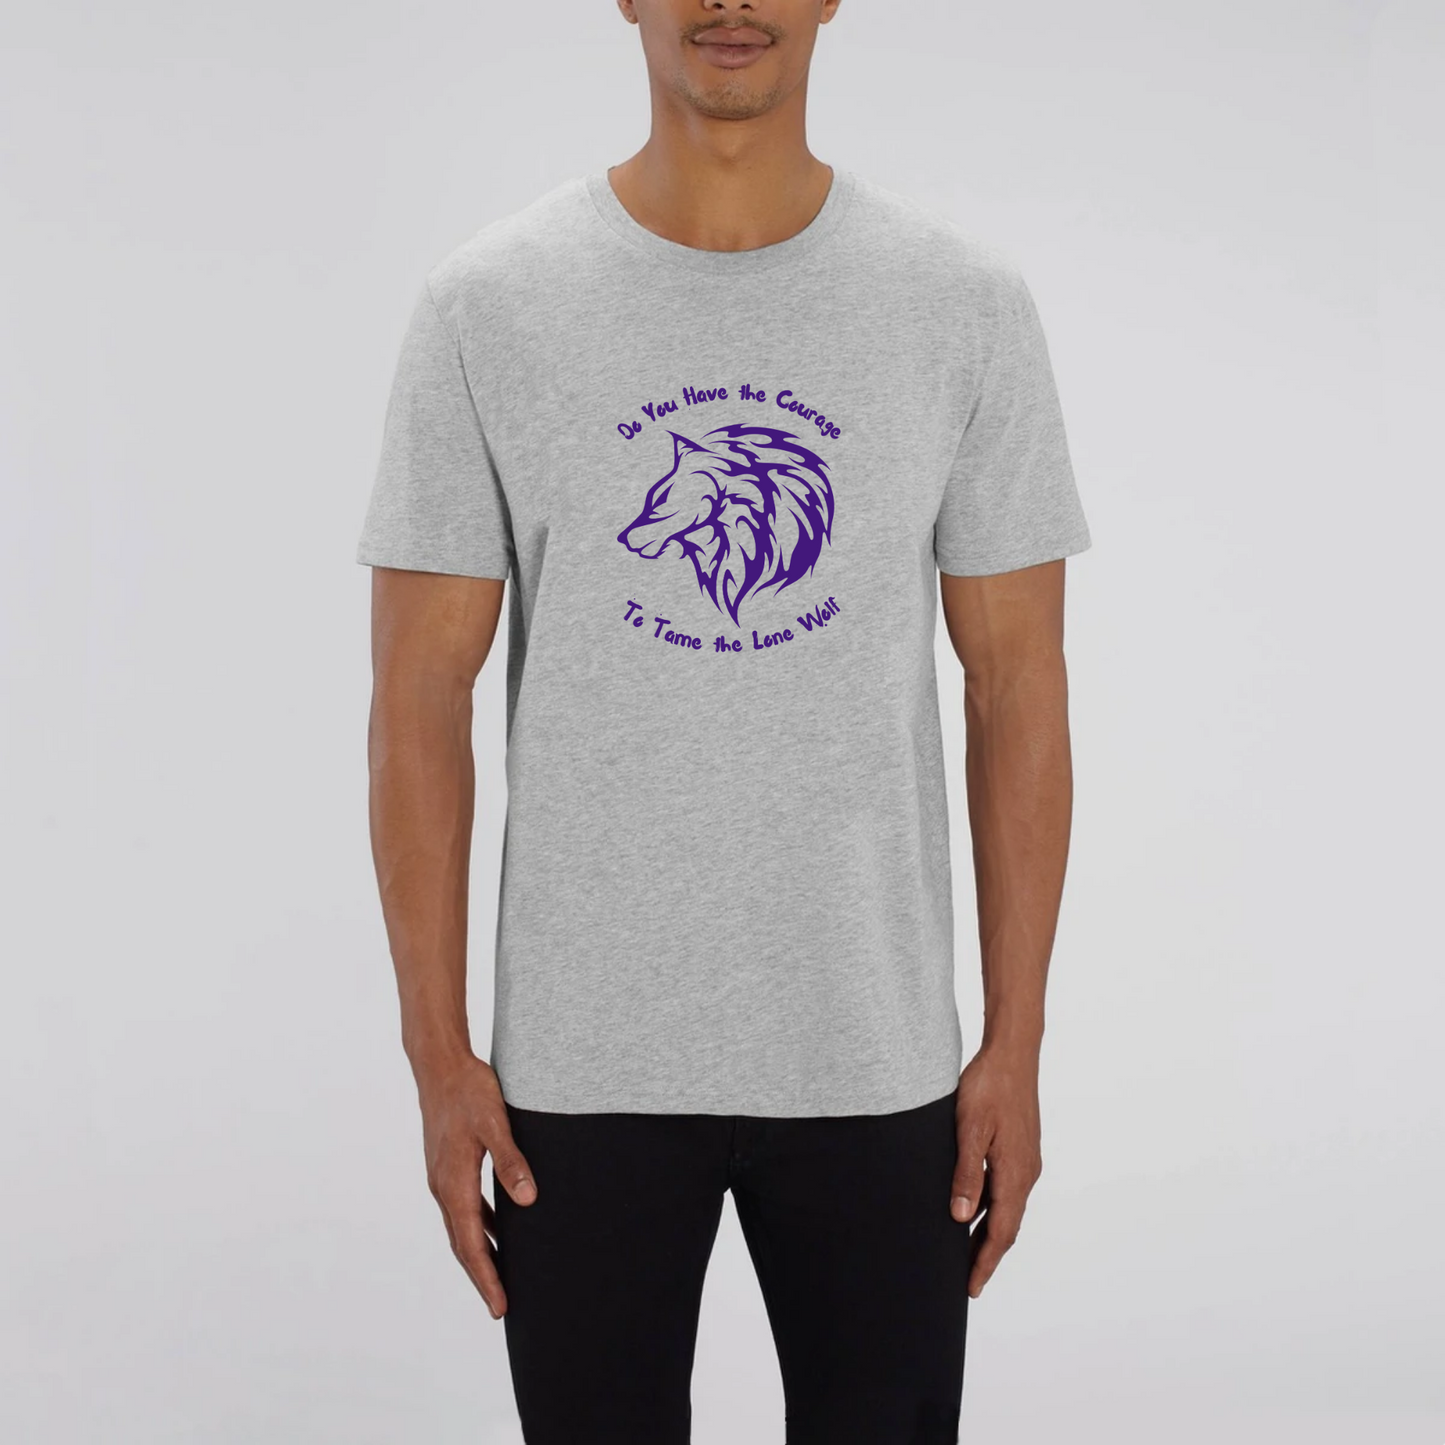 Graphic design t-shirt for men which features the head of a lone male wolf with the words "Do You Have the Courage to Tame the Lone Wolf". The t-shirt is grey